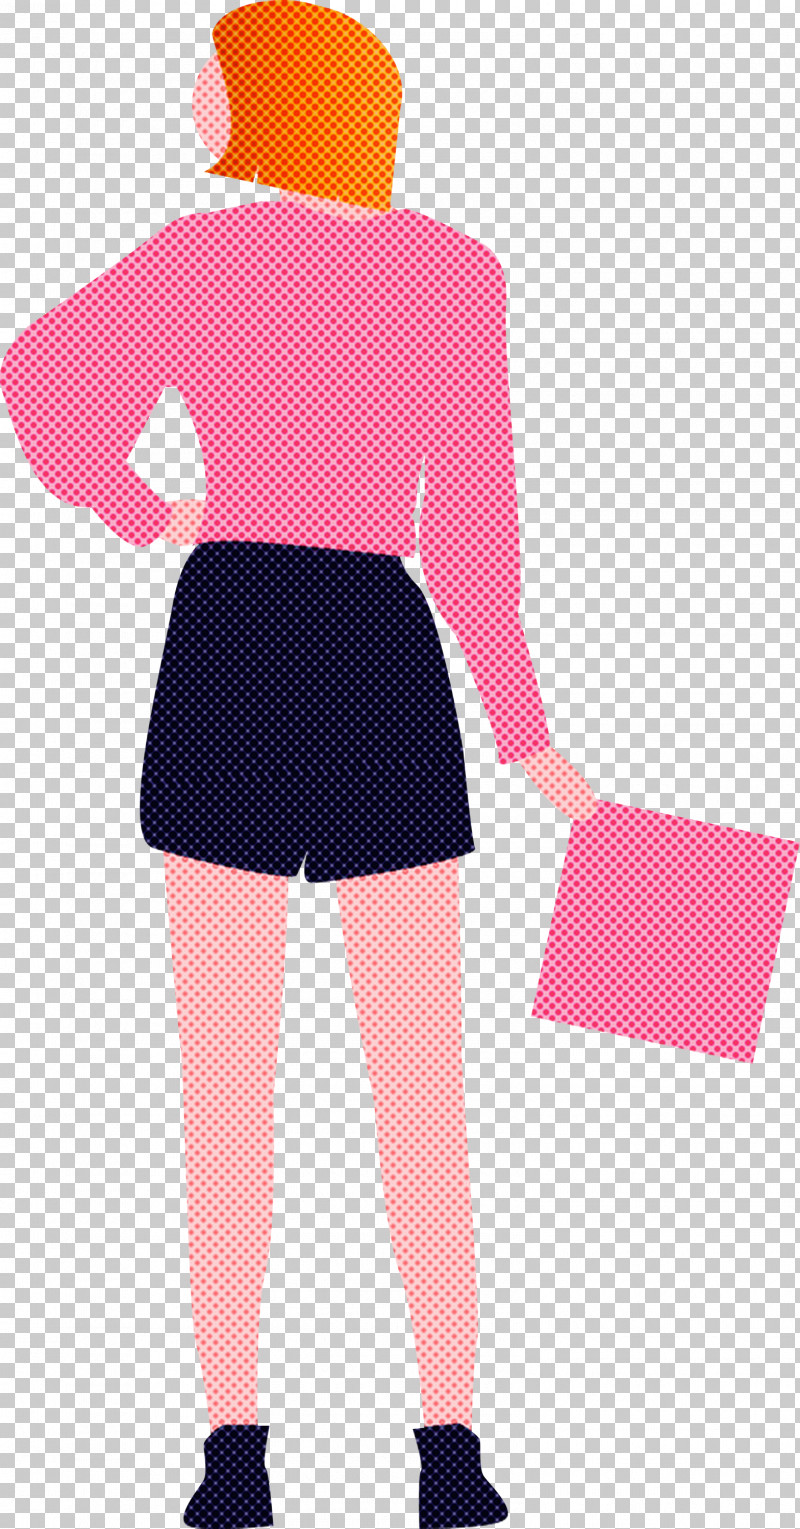 Woman Holding Paper Fashion Lady PNG, Clipart, Clothing, Costume, Fashion Lady, Human Leg, Magenta Free PNG Download